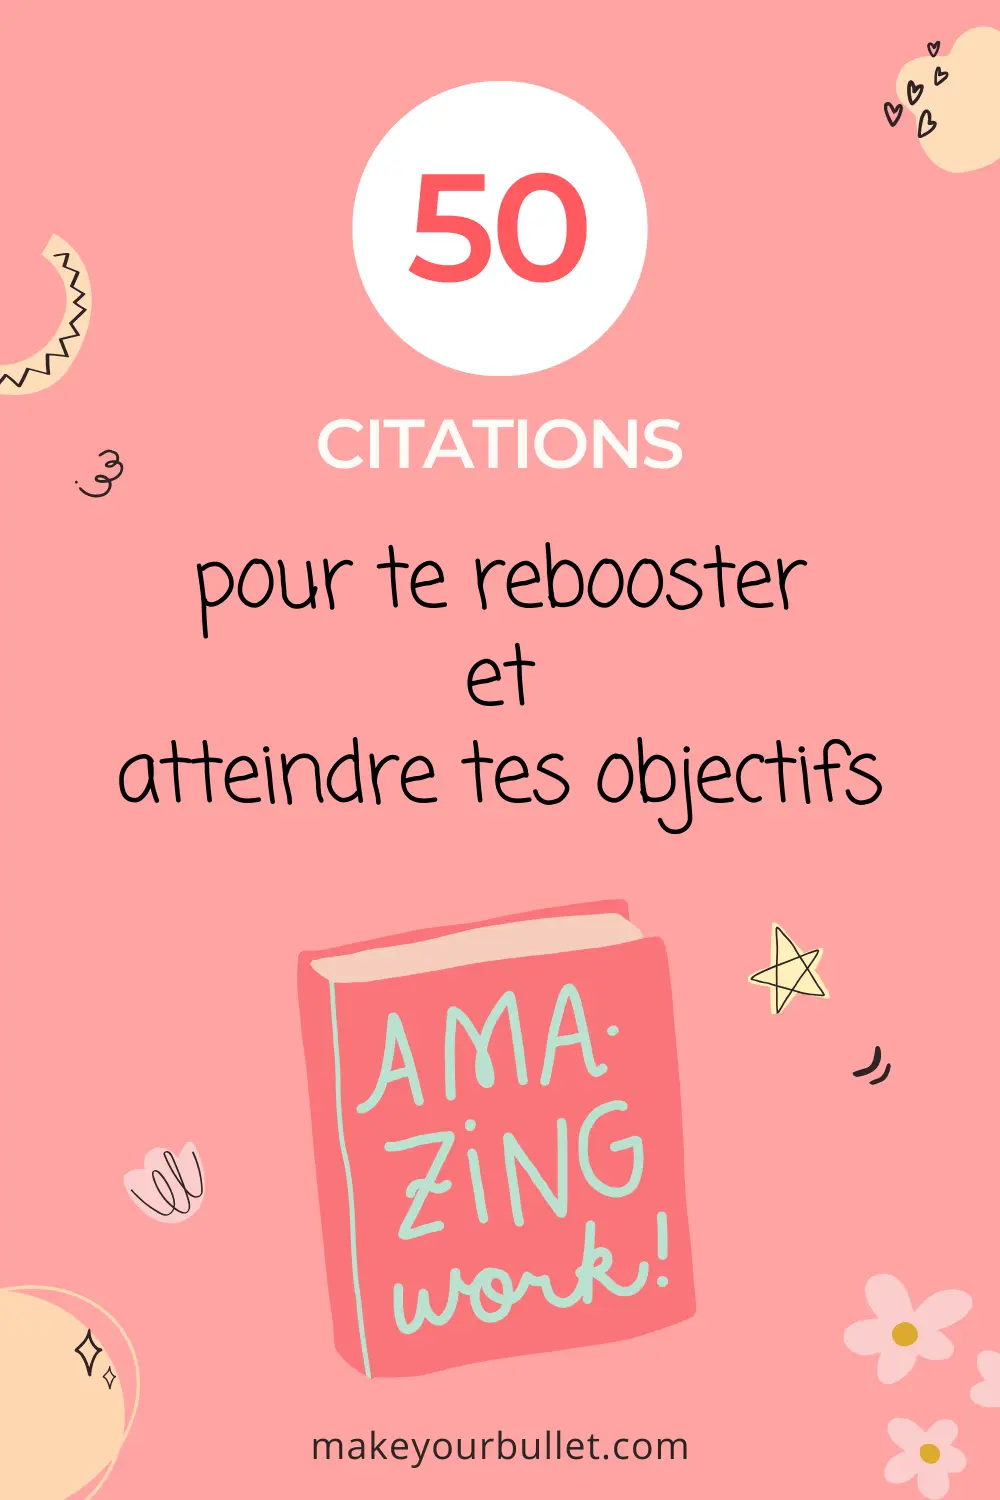 50-citations-energie-atteindre-objectifs-courage